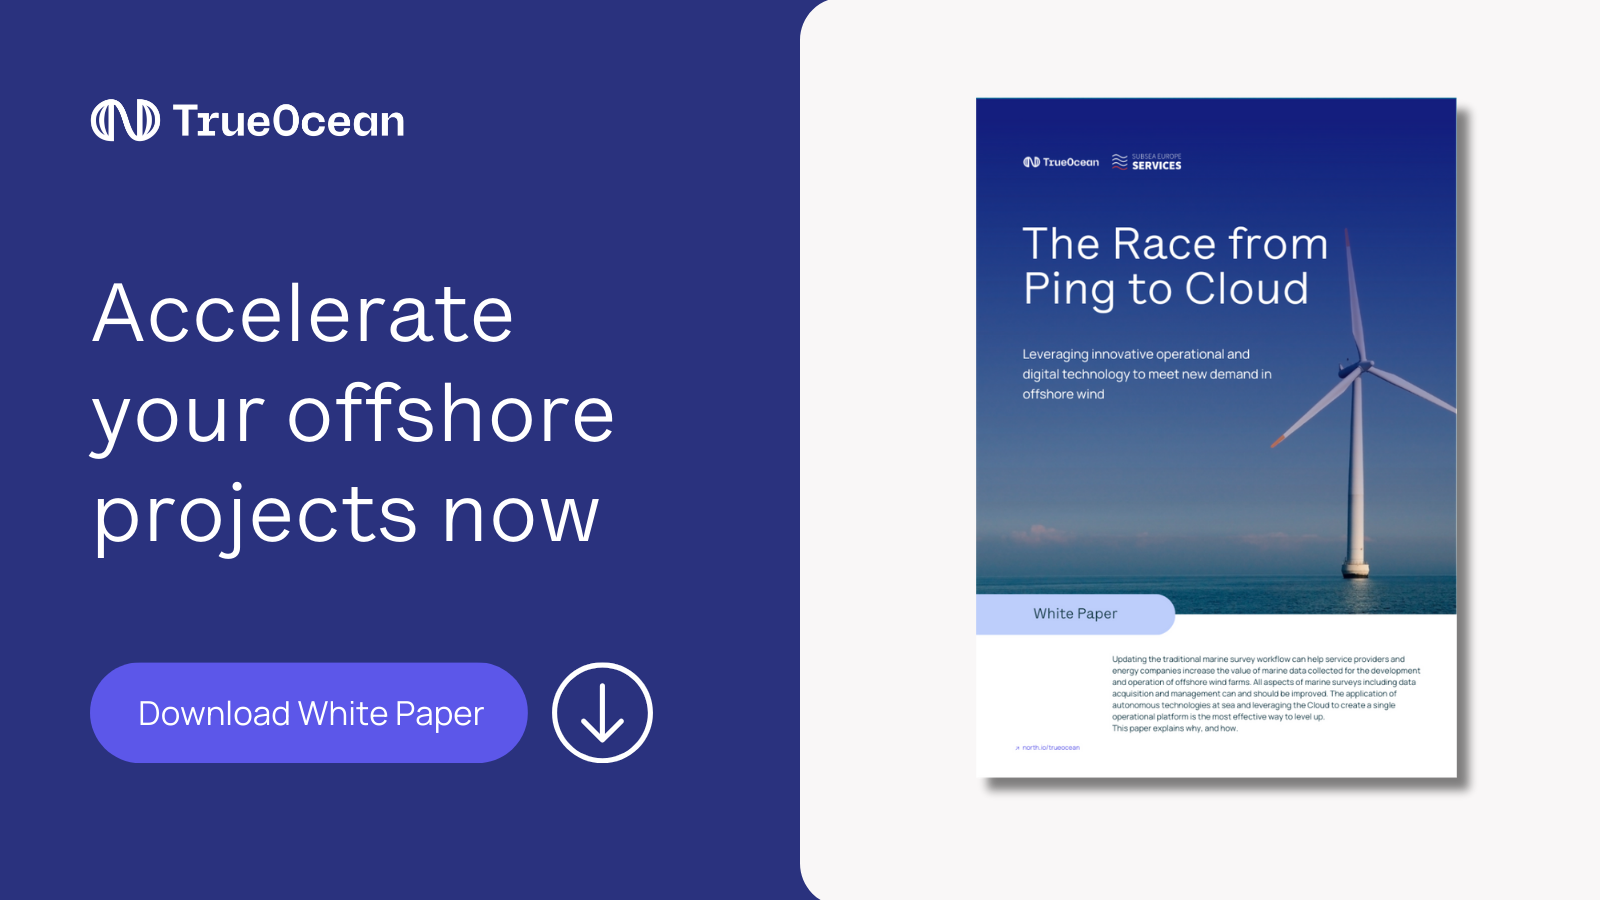 Whitepaper: The Race from Ping to Cloud